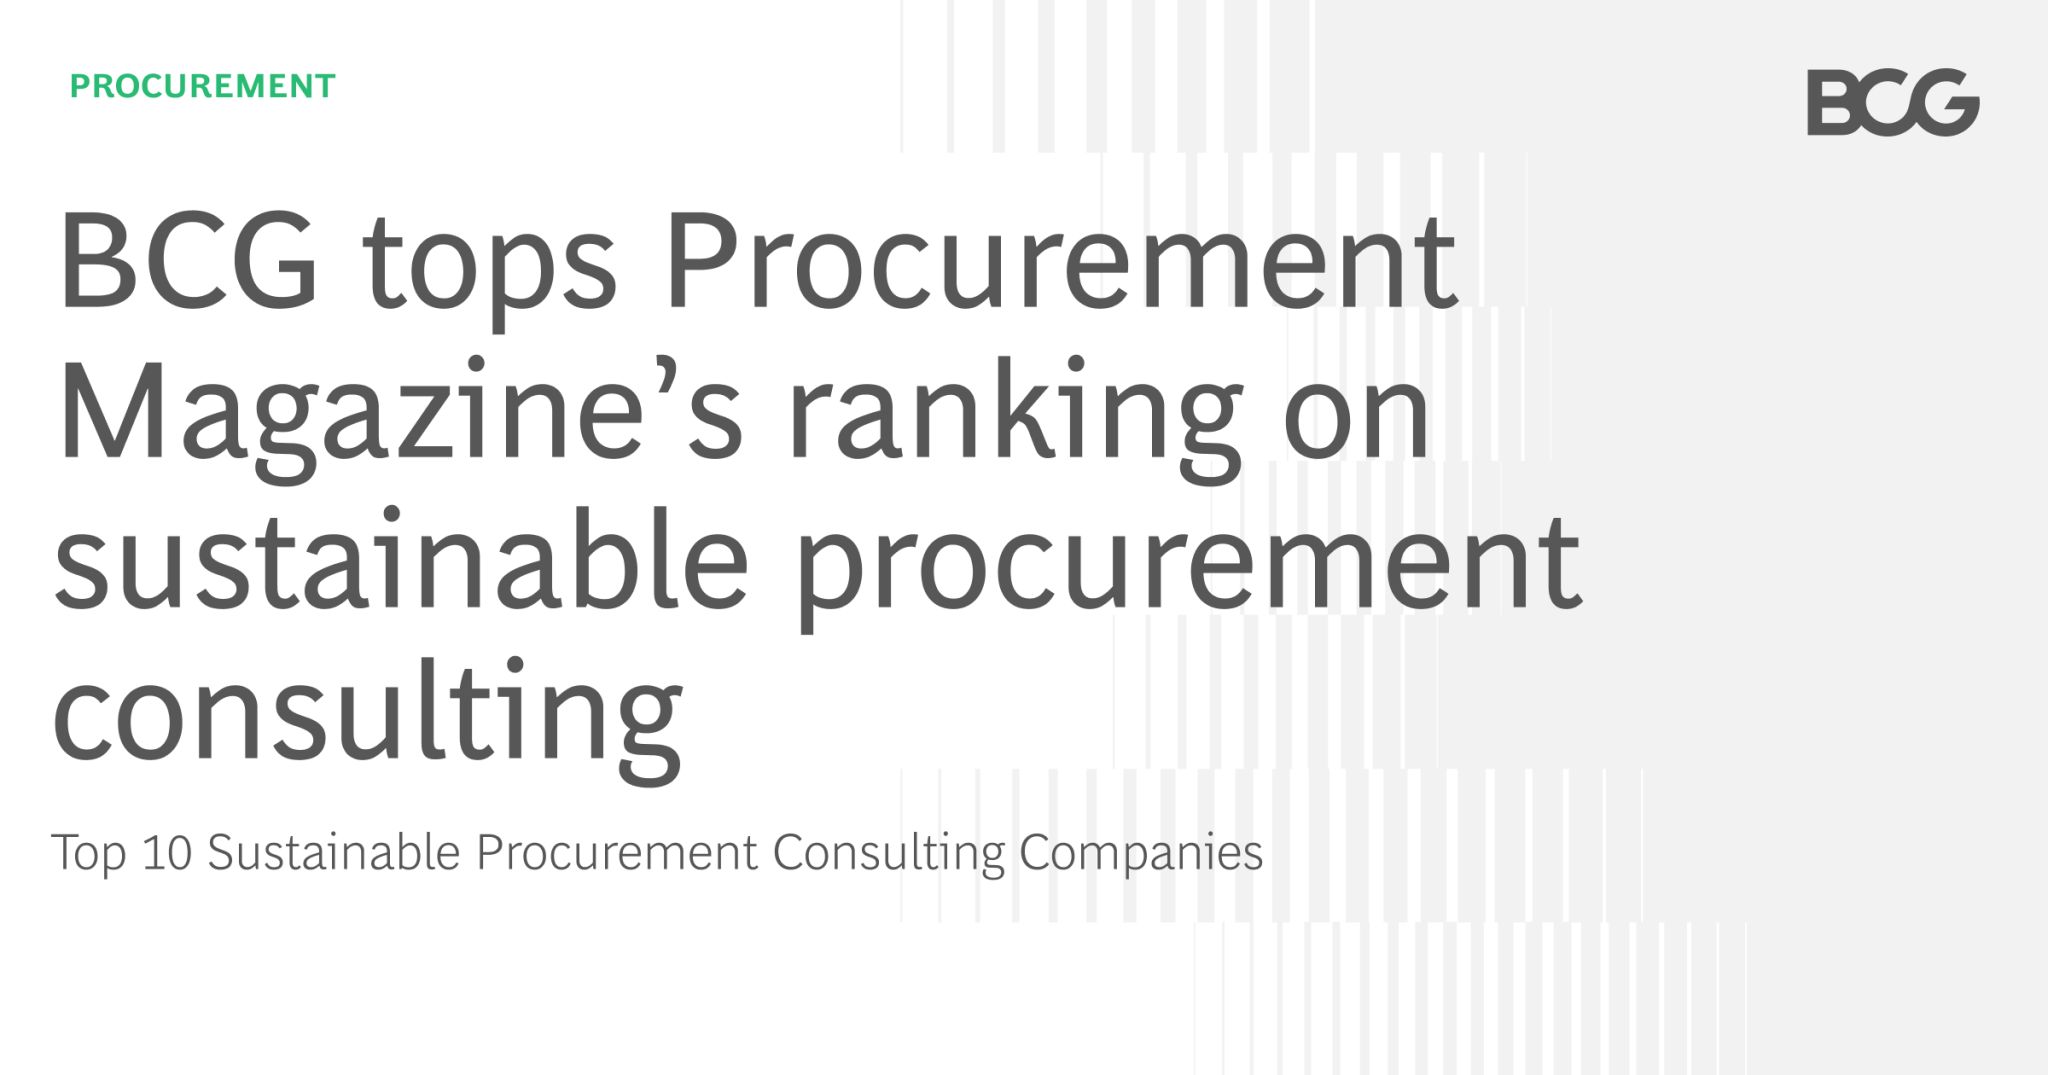 Dr. Marcell Vollmer 🇺🇦 #StaySafe #MWC23 on Twitter: "Top 10 Sustainable #Procurement Consulting Companies. Congrats to Daniel Weise and in the @BCG procurement for being ranked #1 for sustainable procurement